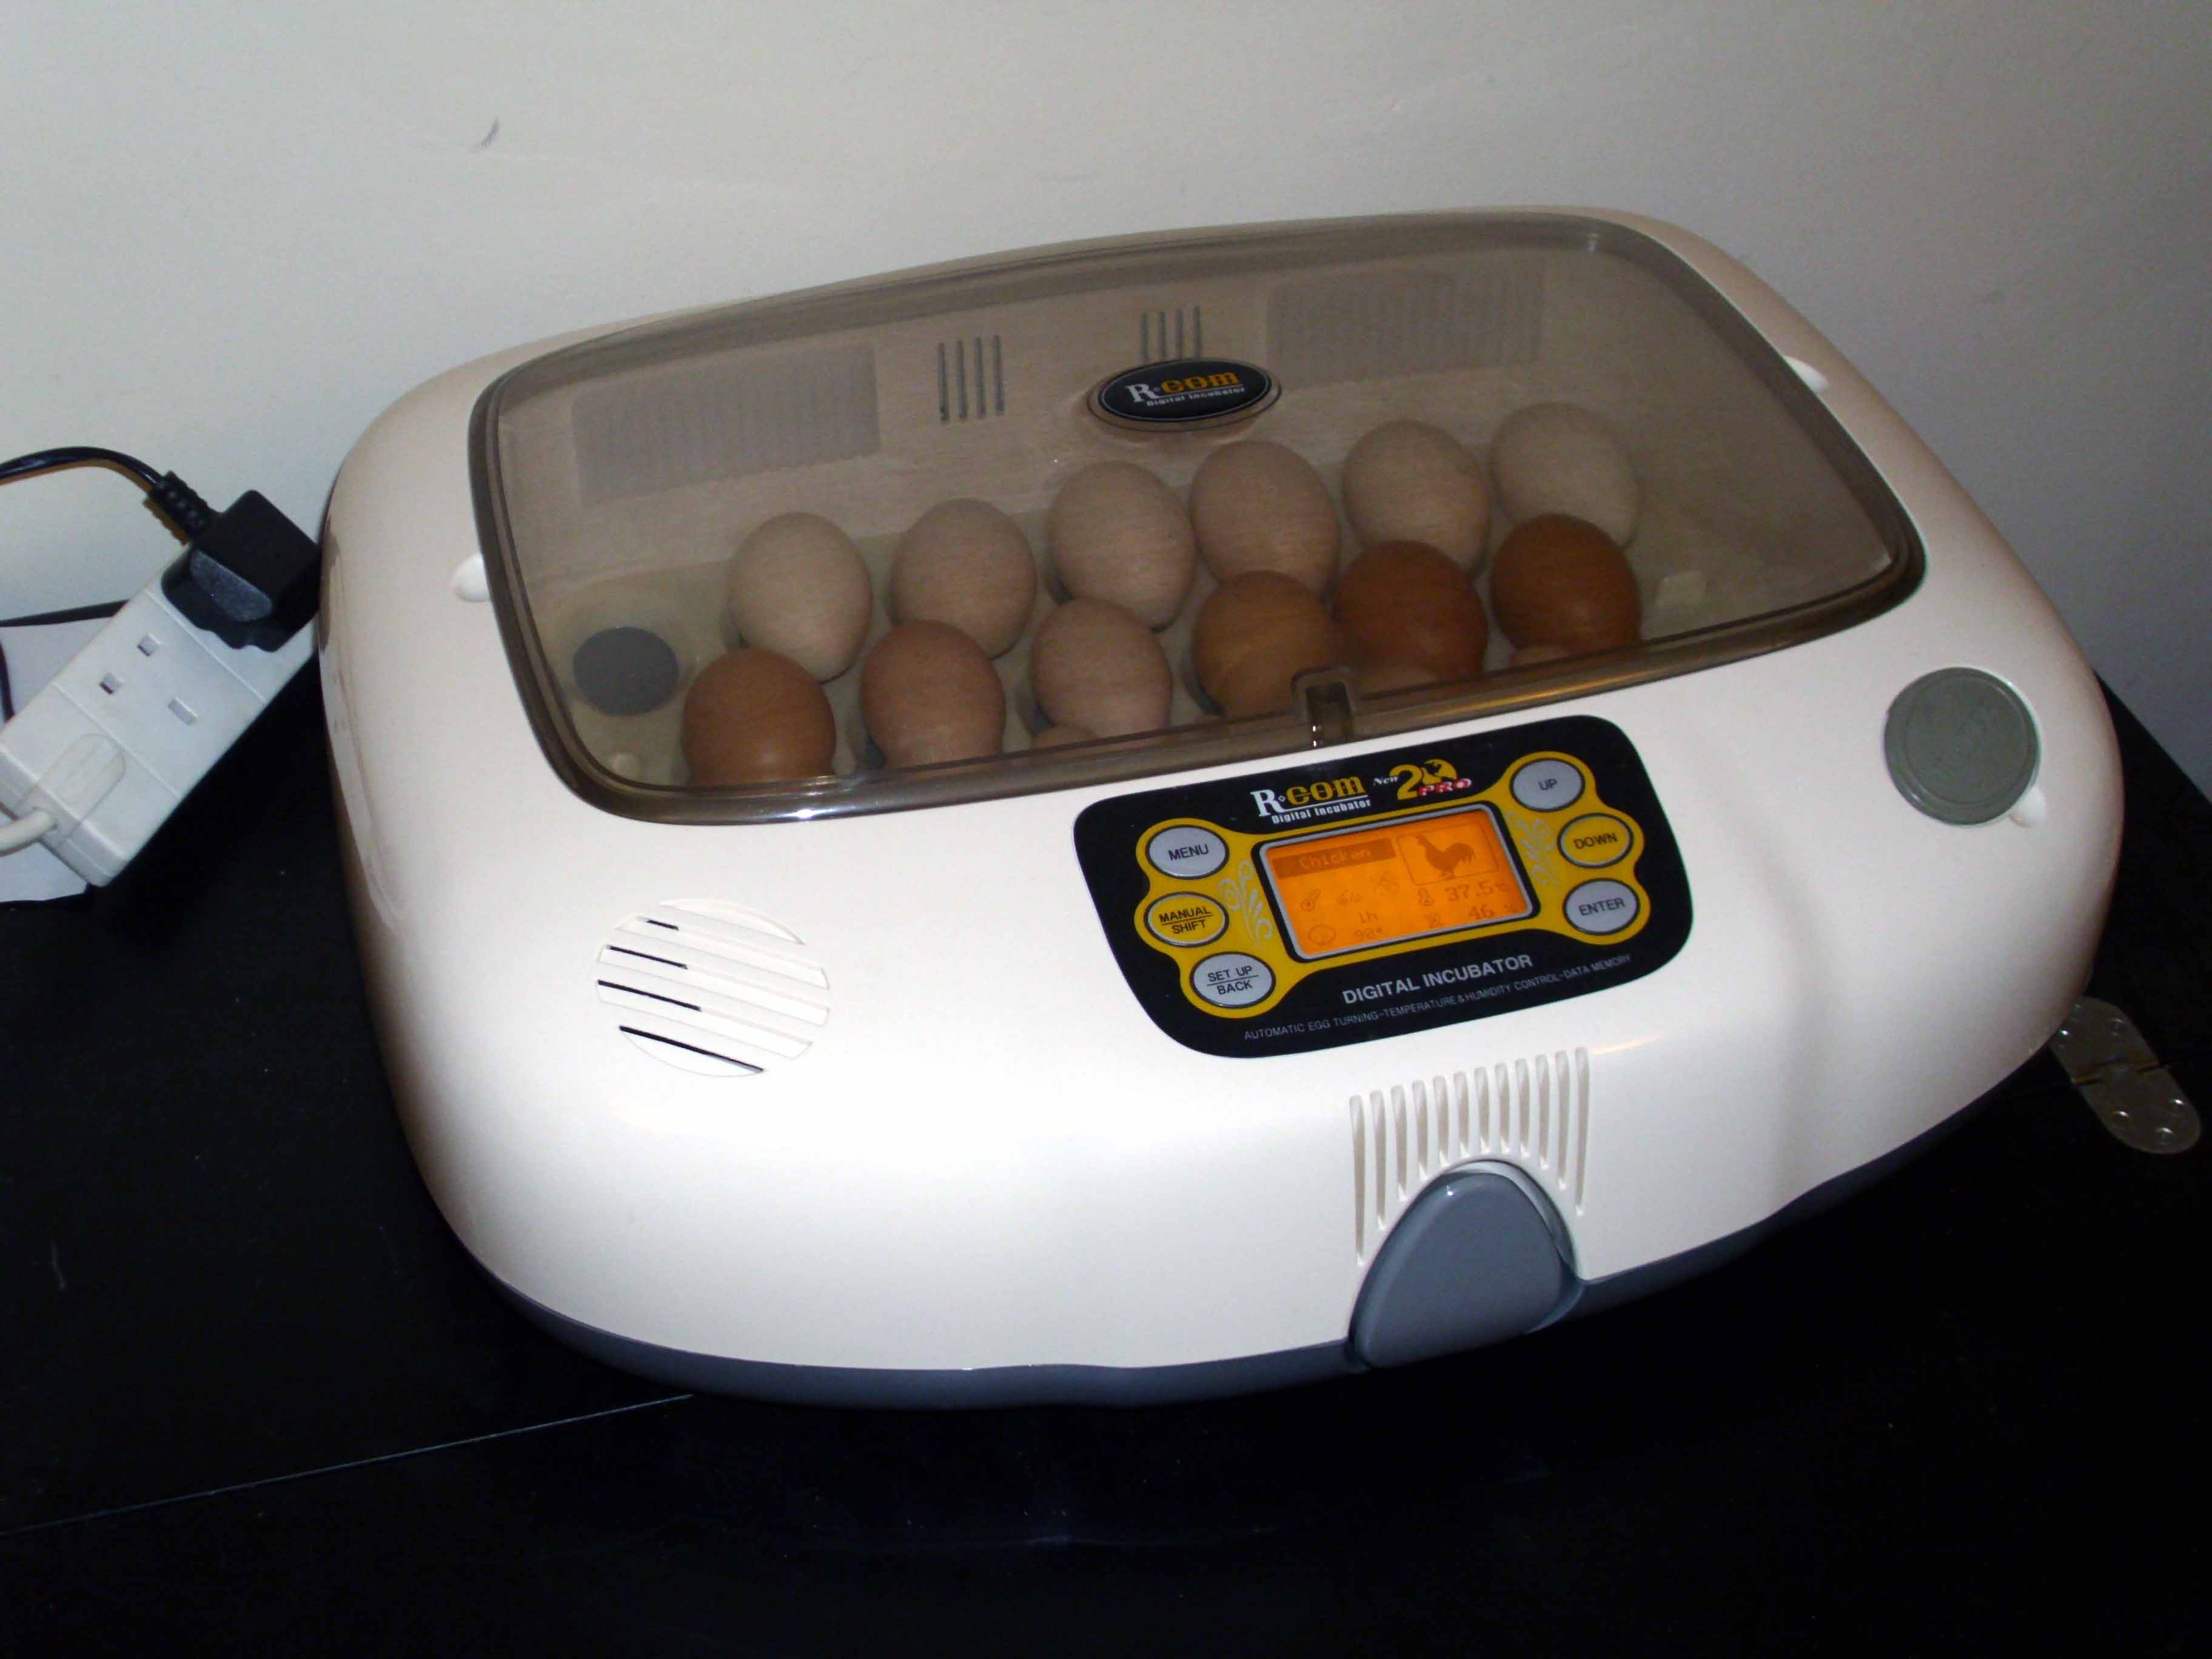  -Turning-Poultry-Incubator-for-Maximum-12-Eggs-Gpnc_783--89522290.htm